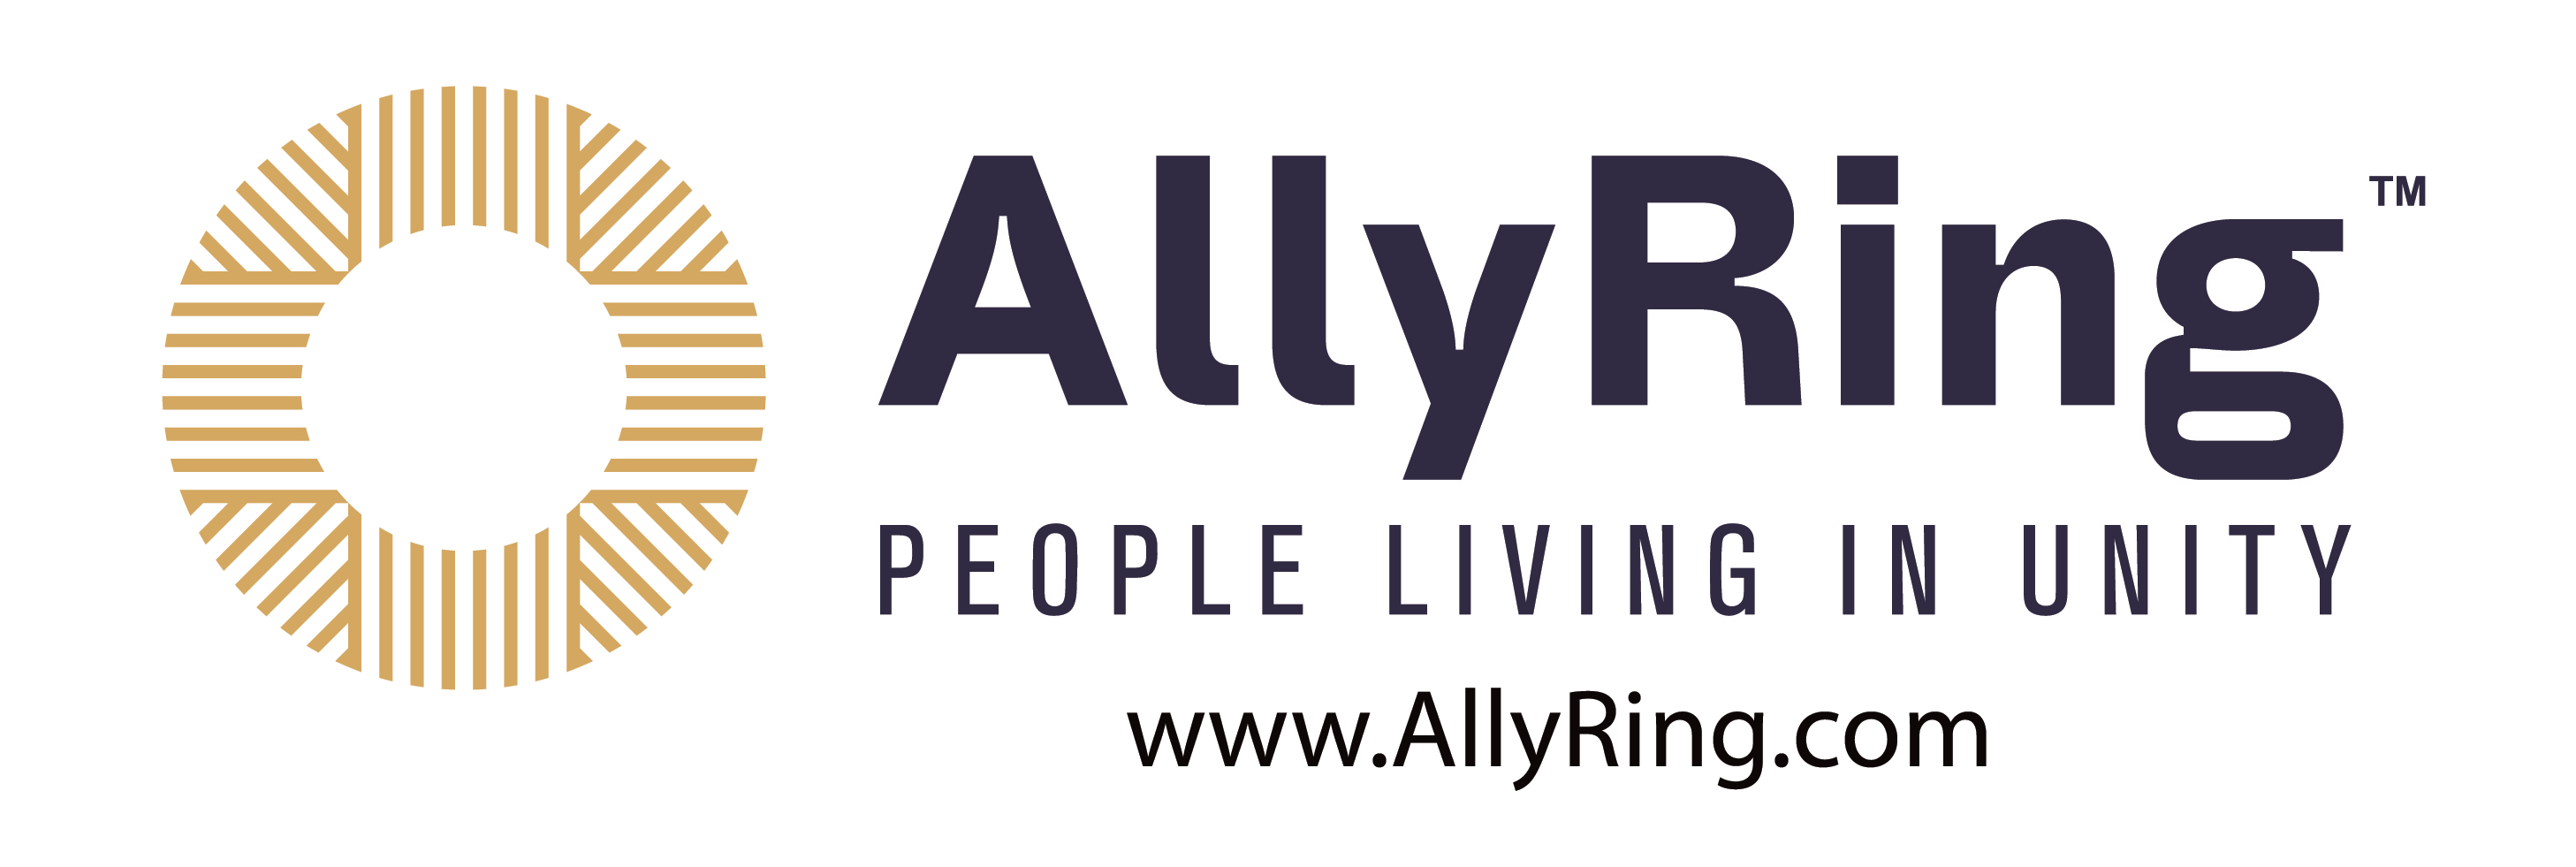 It's Time for a Different Approach to Social Justice: the Ally Ring Launches Today; be a Part of Creating More Unity & Equality for All